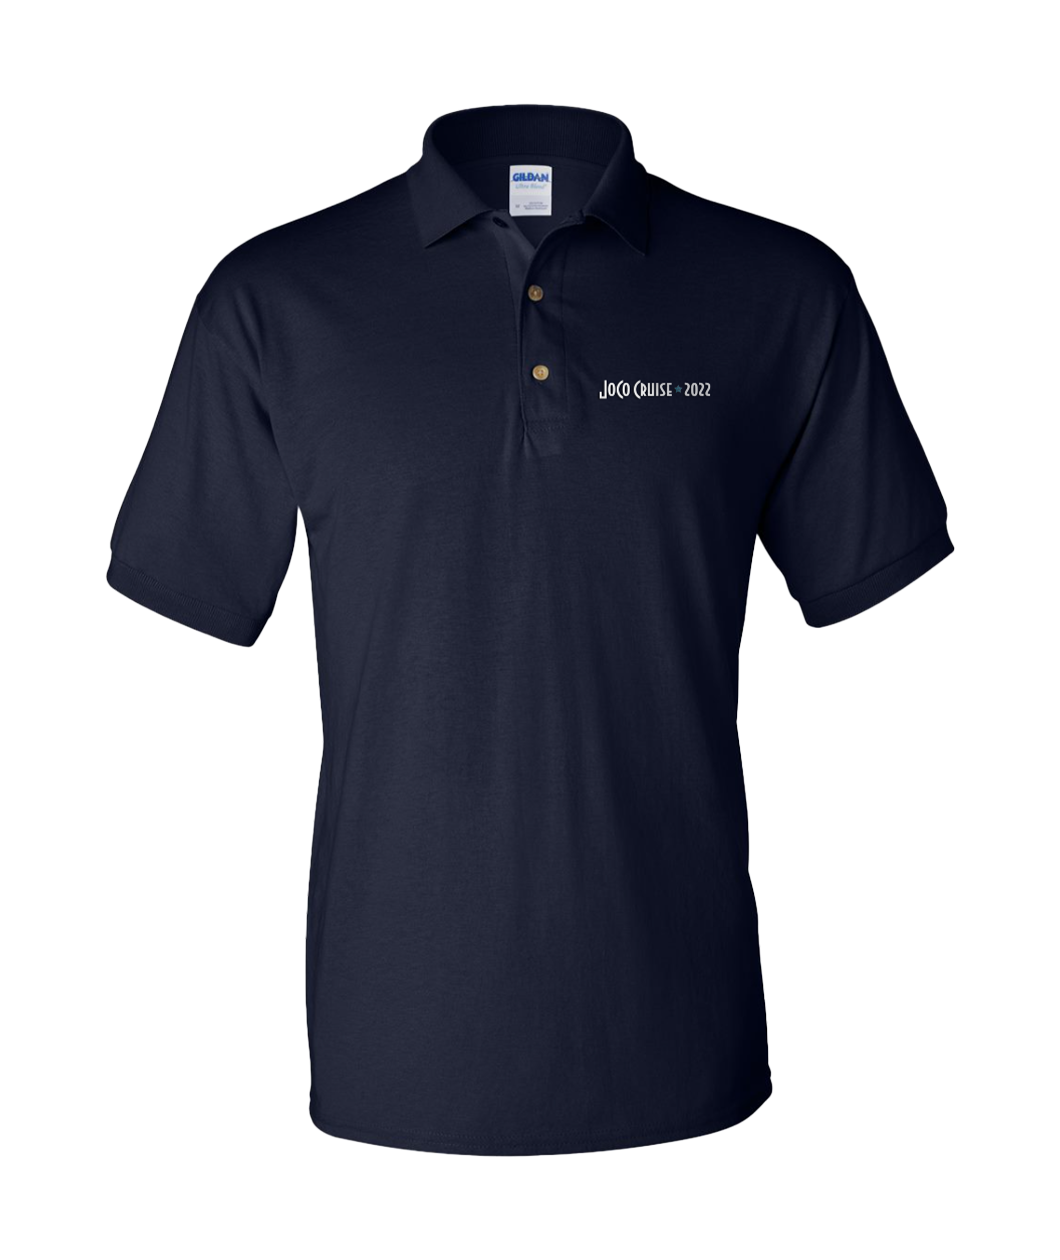 A dark blue polo shirt with “JoCo Cruise 2022” is in white sans serif font in the top right of the shirt - from JoCo Cruise